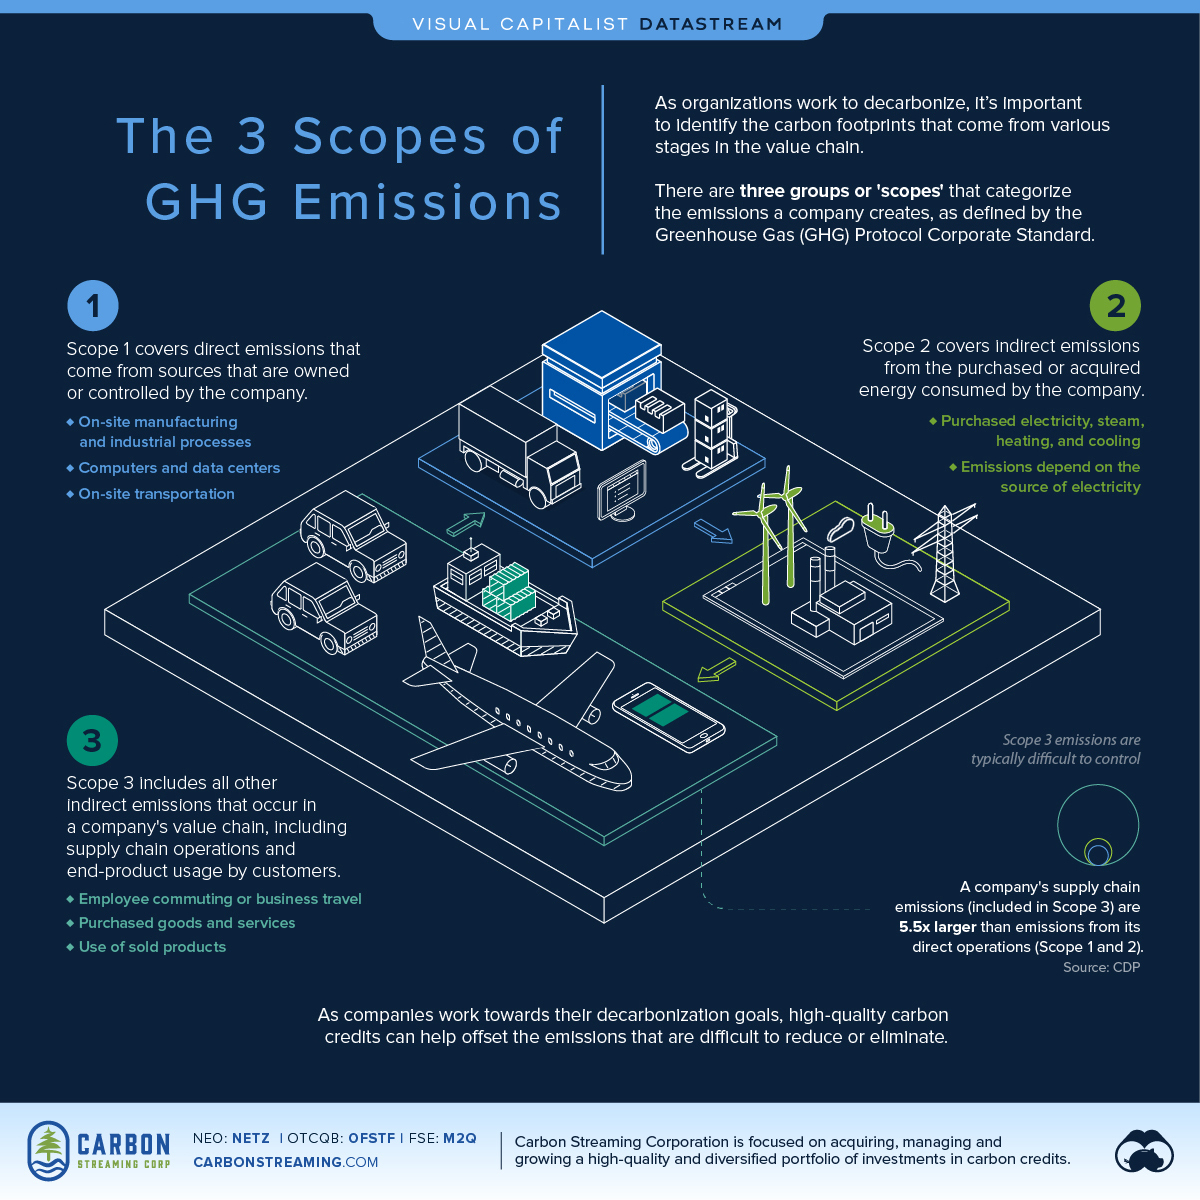 Visualizing the 3 Scopes of Greenhouse Gas Emissions